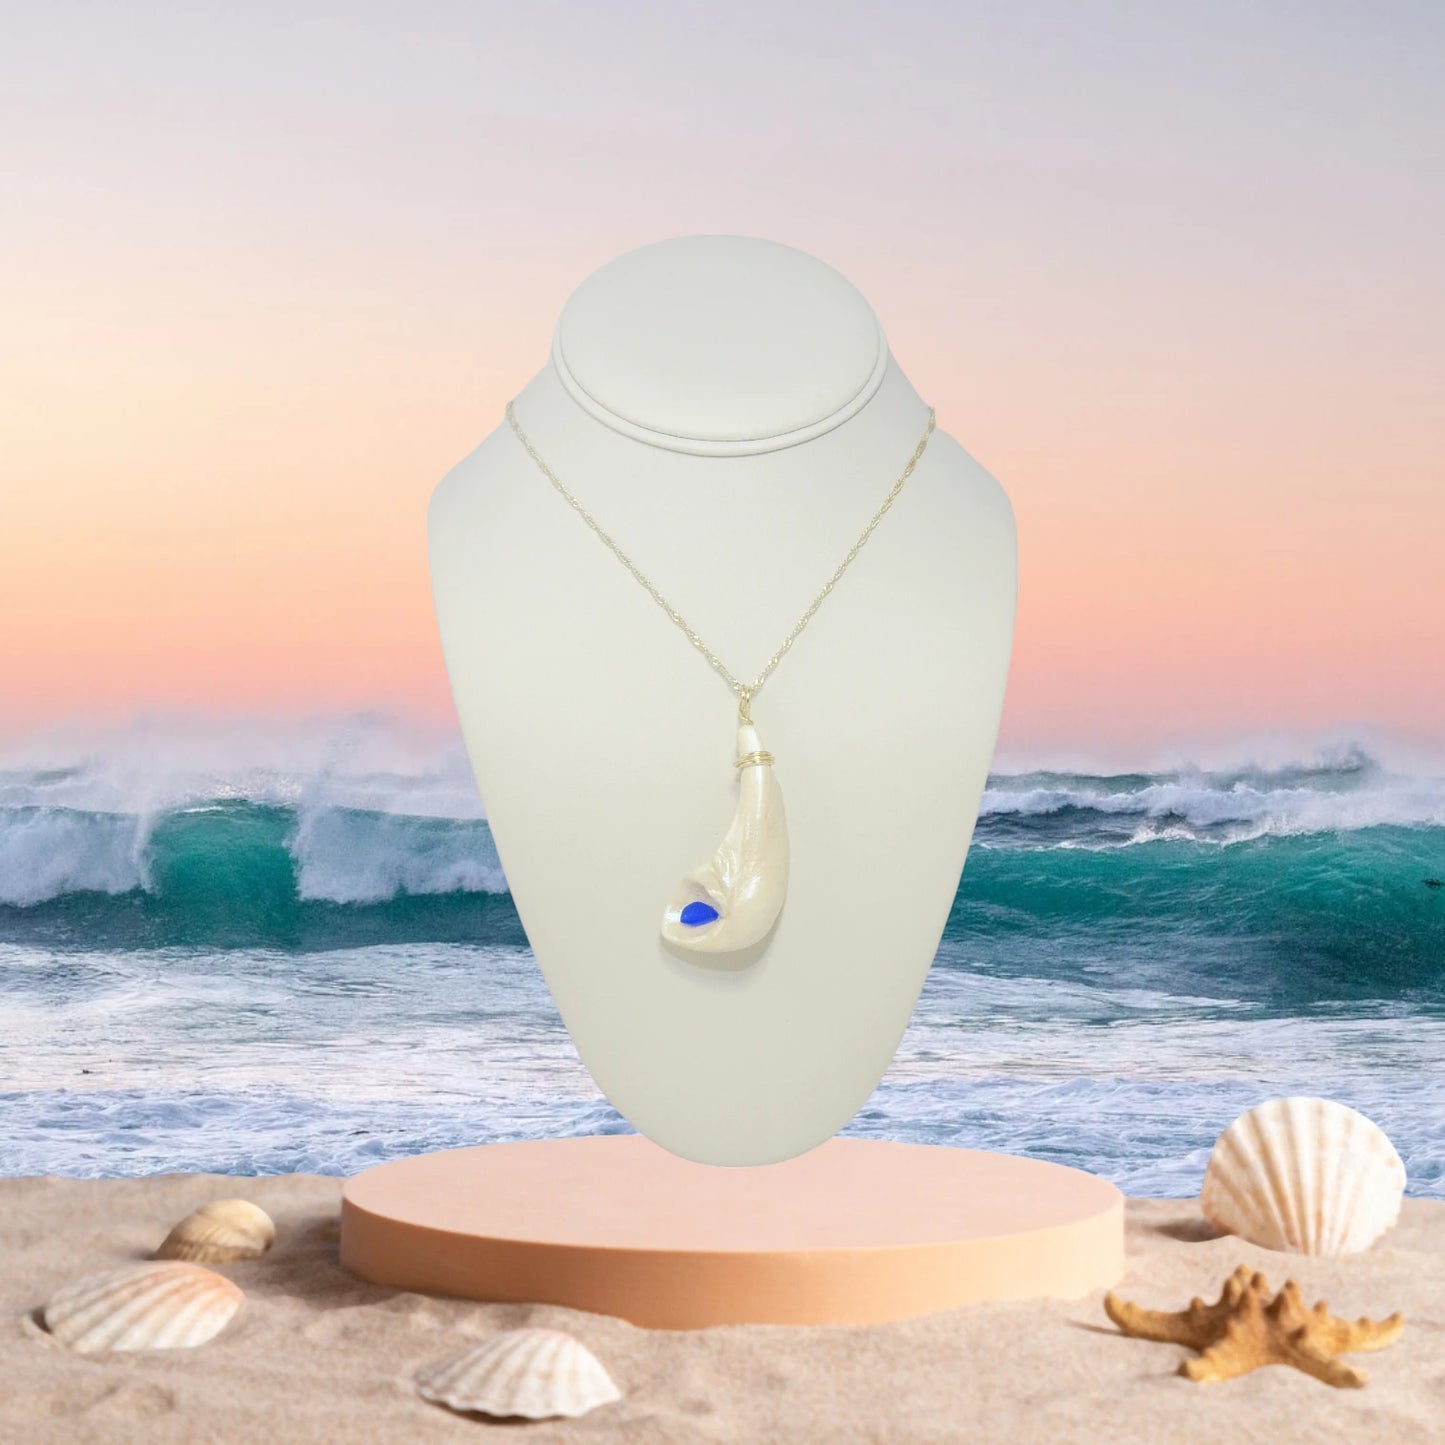 The cobalt pendant is shown hanging on a chain on a necklace displayer.  The setting sun over the ocean waves heading towards the sandy beach.  A few seashells and a starfish lay strewn about the sand.